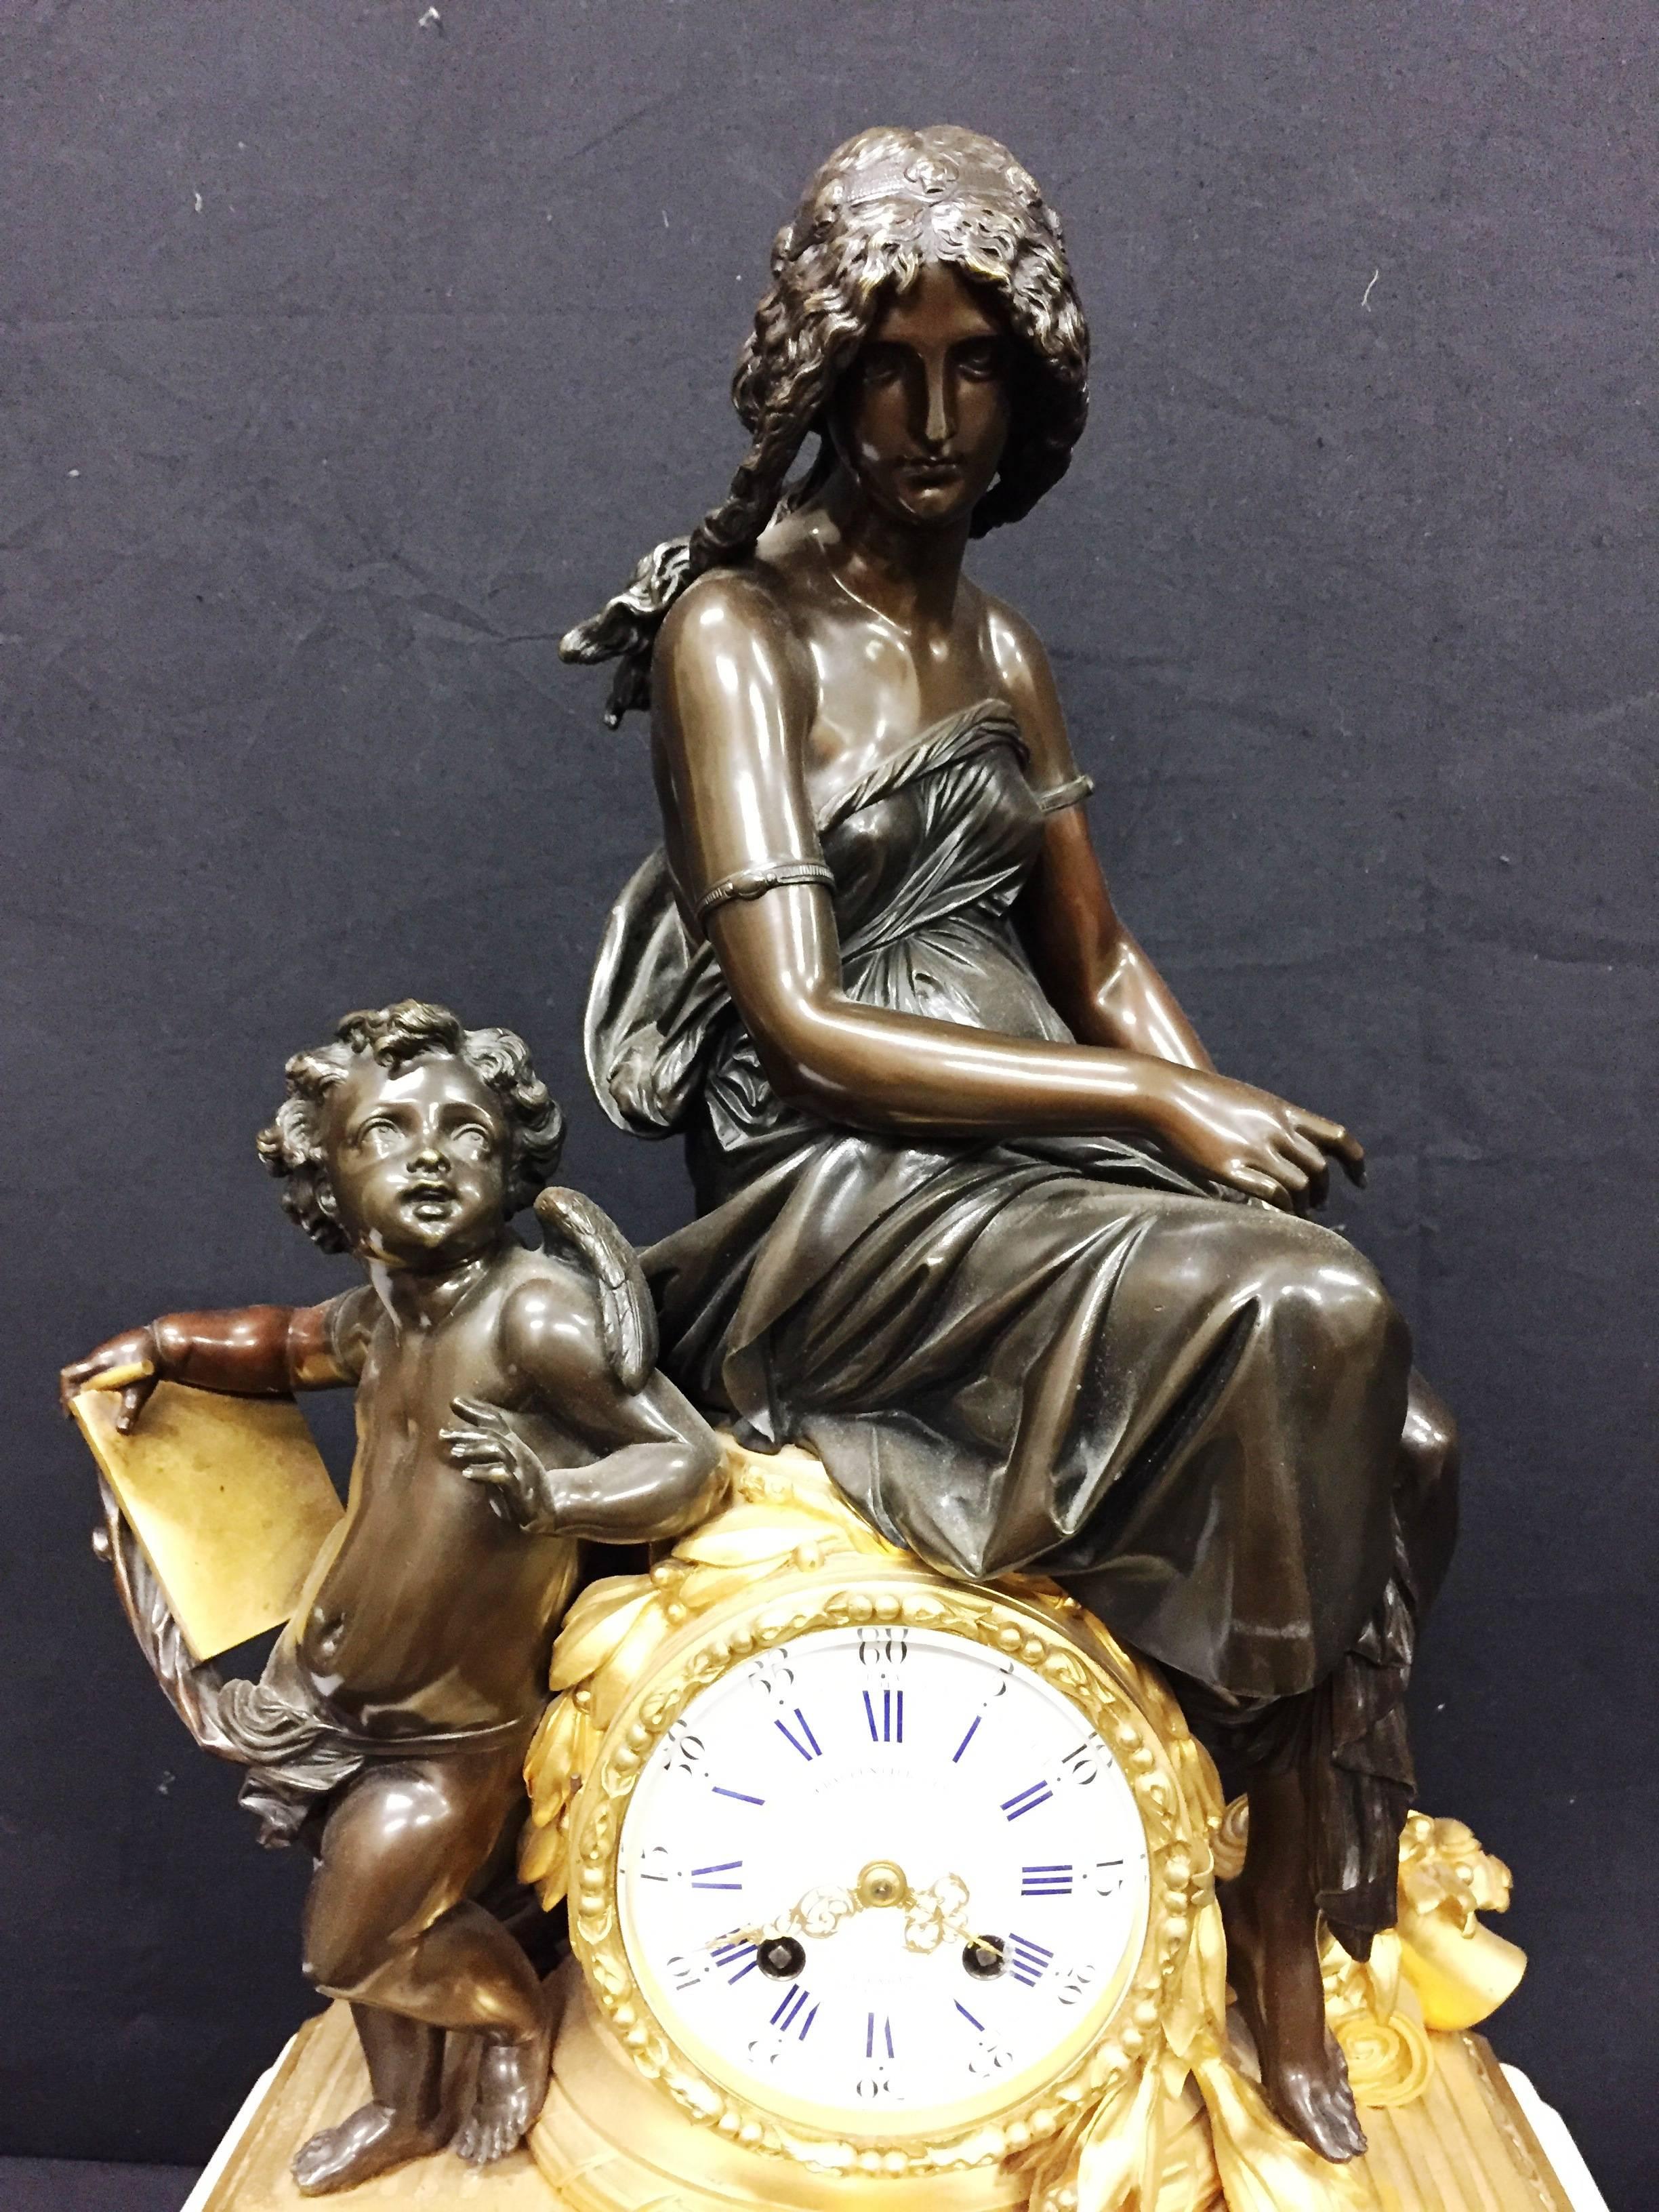 A very good quality French 19th Century gilded ormolu and bronze mantel clock having a mother and child above and to the side of the clock face. Mounted on a white marble base.